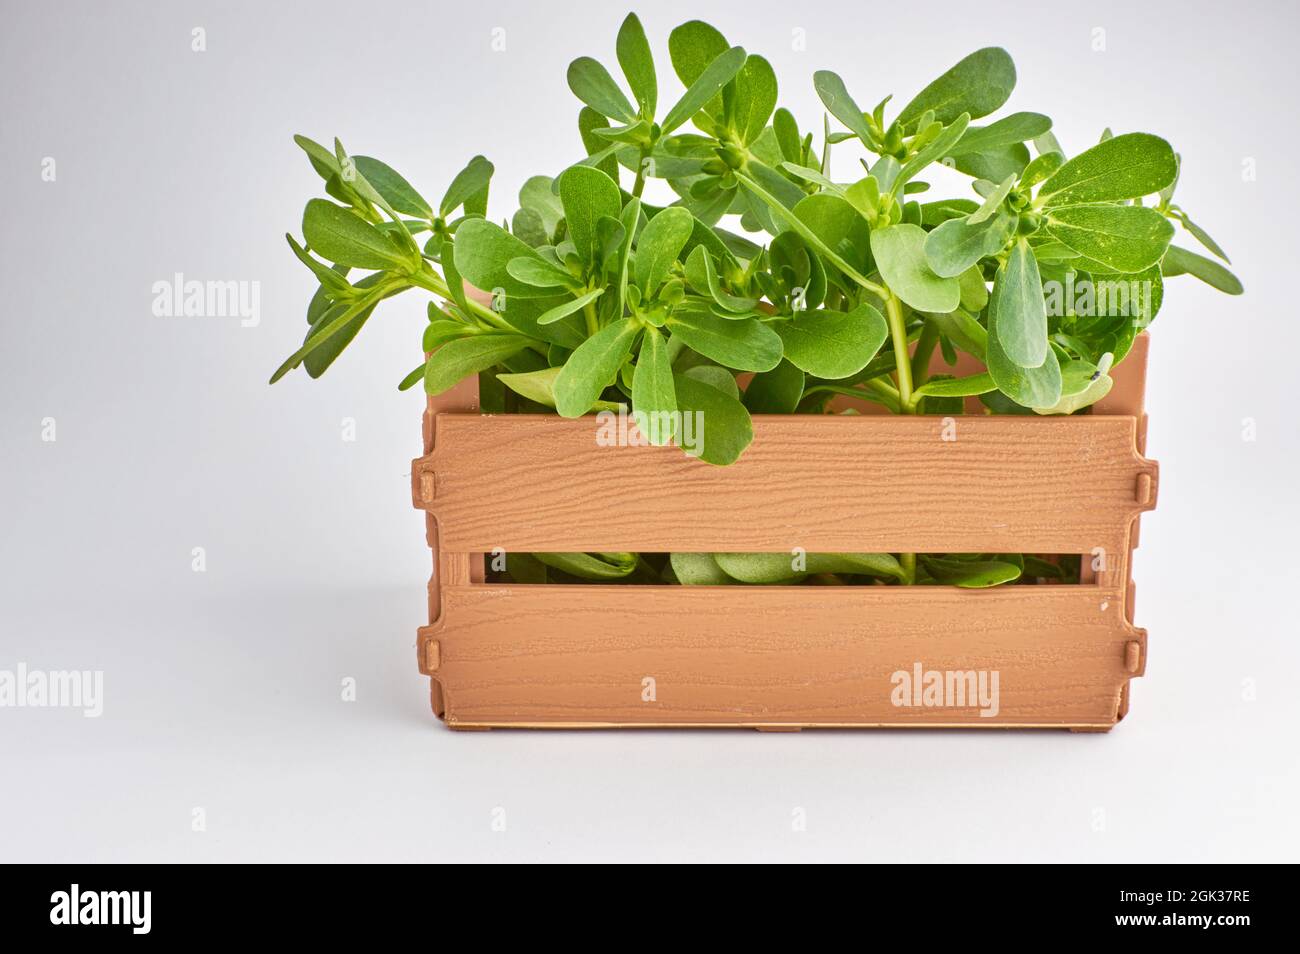 Fresh purslane plant in a wooden crate on a background Portulaca oleracea Stock Photo